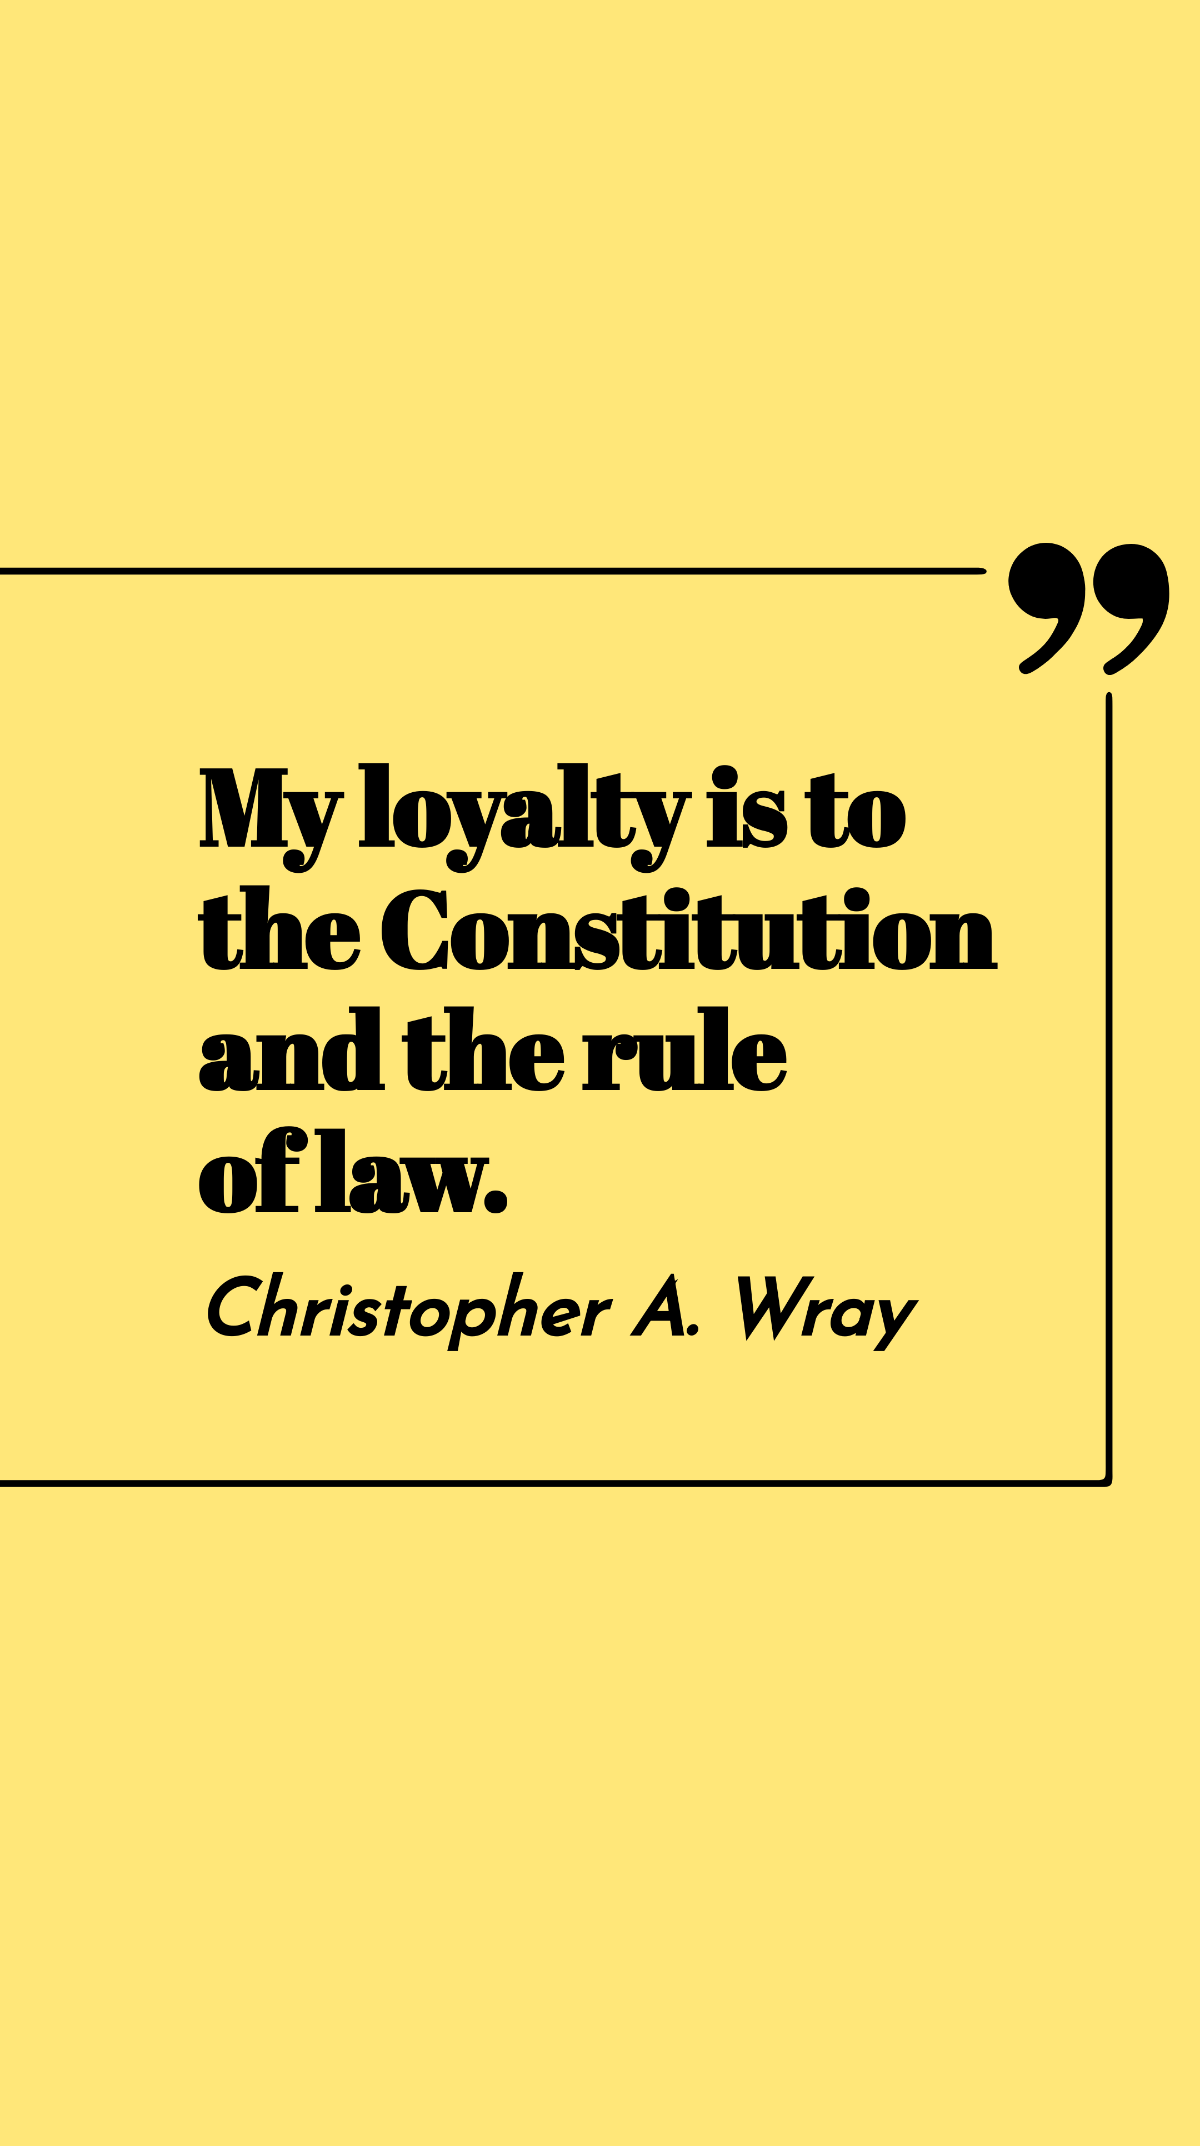 Christopher A. Wray - My loyalty is to the Constitution and the rule of law. Template